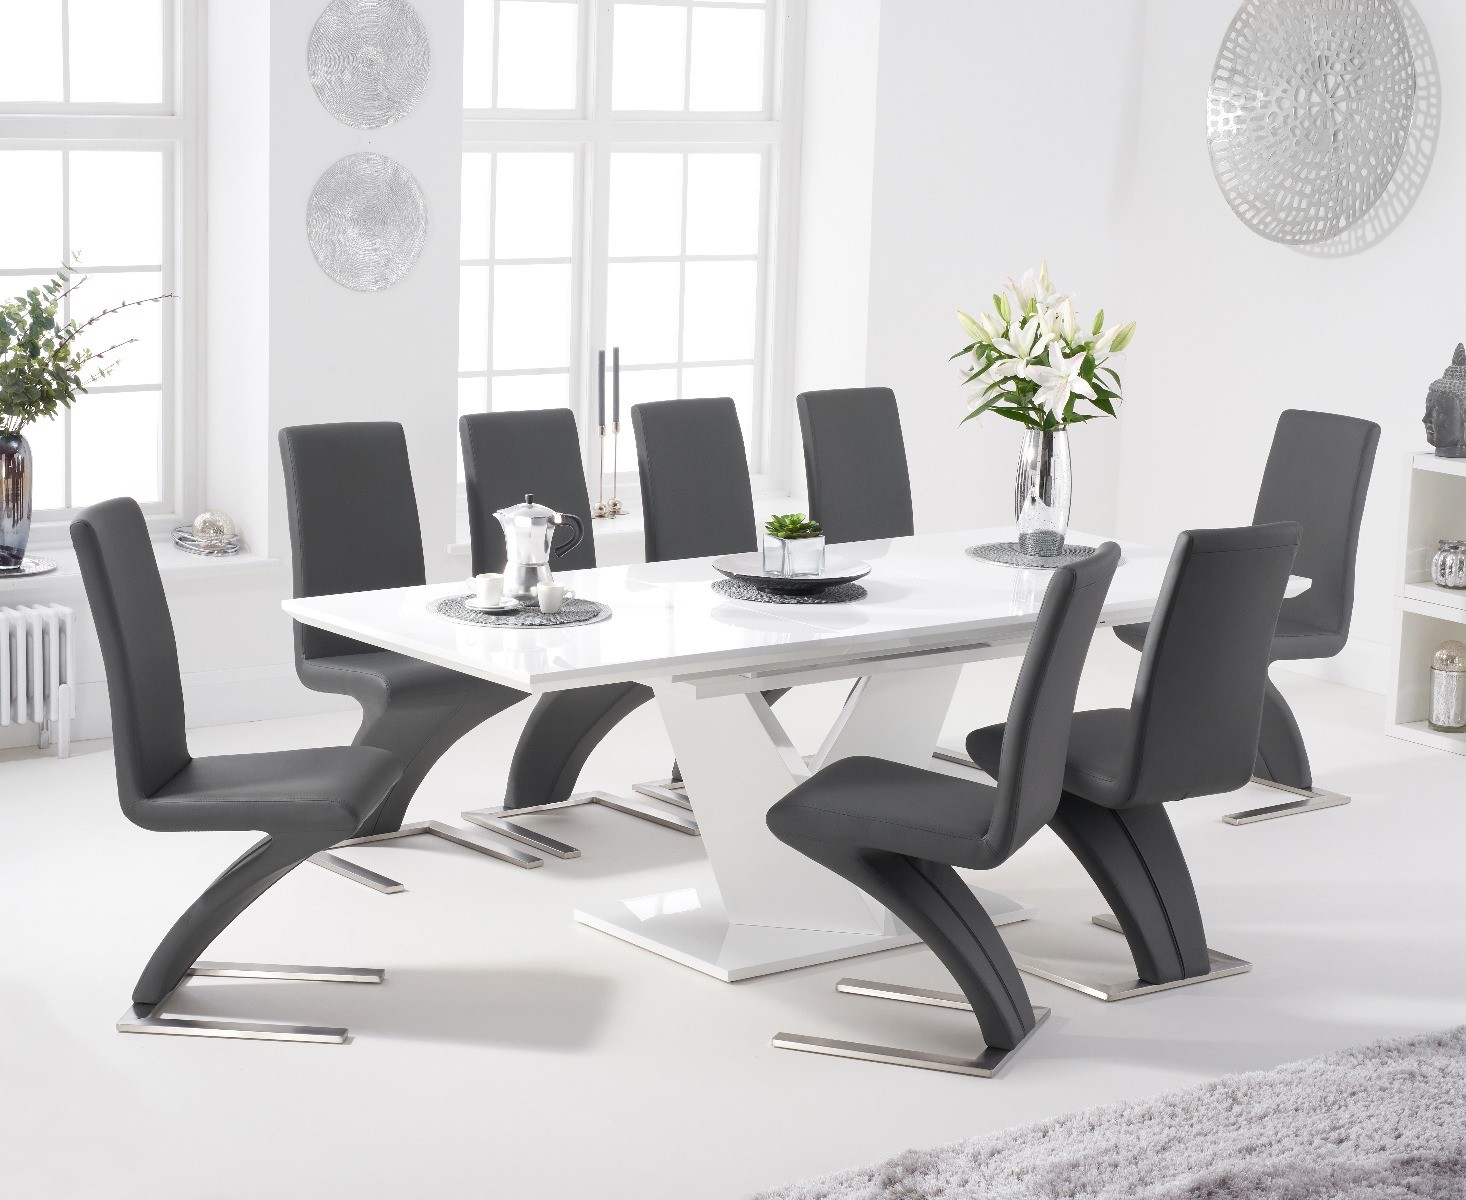 Vittorio 160cm White High Gloss Extending Dining Table With 10 Black Hampstead Faux Leather Chairs